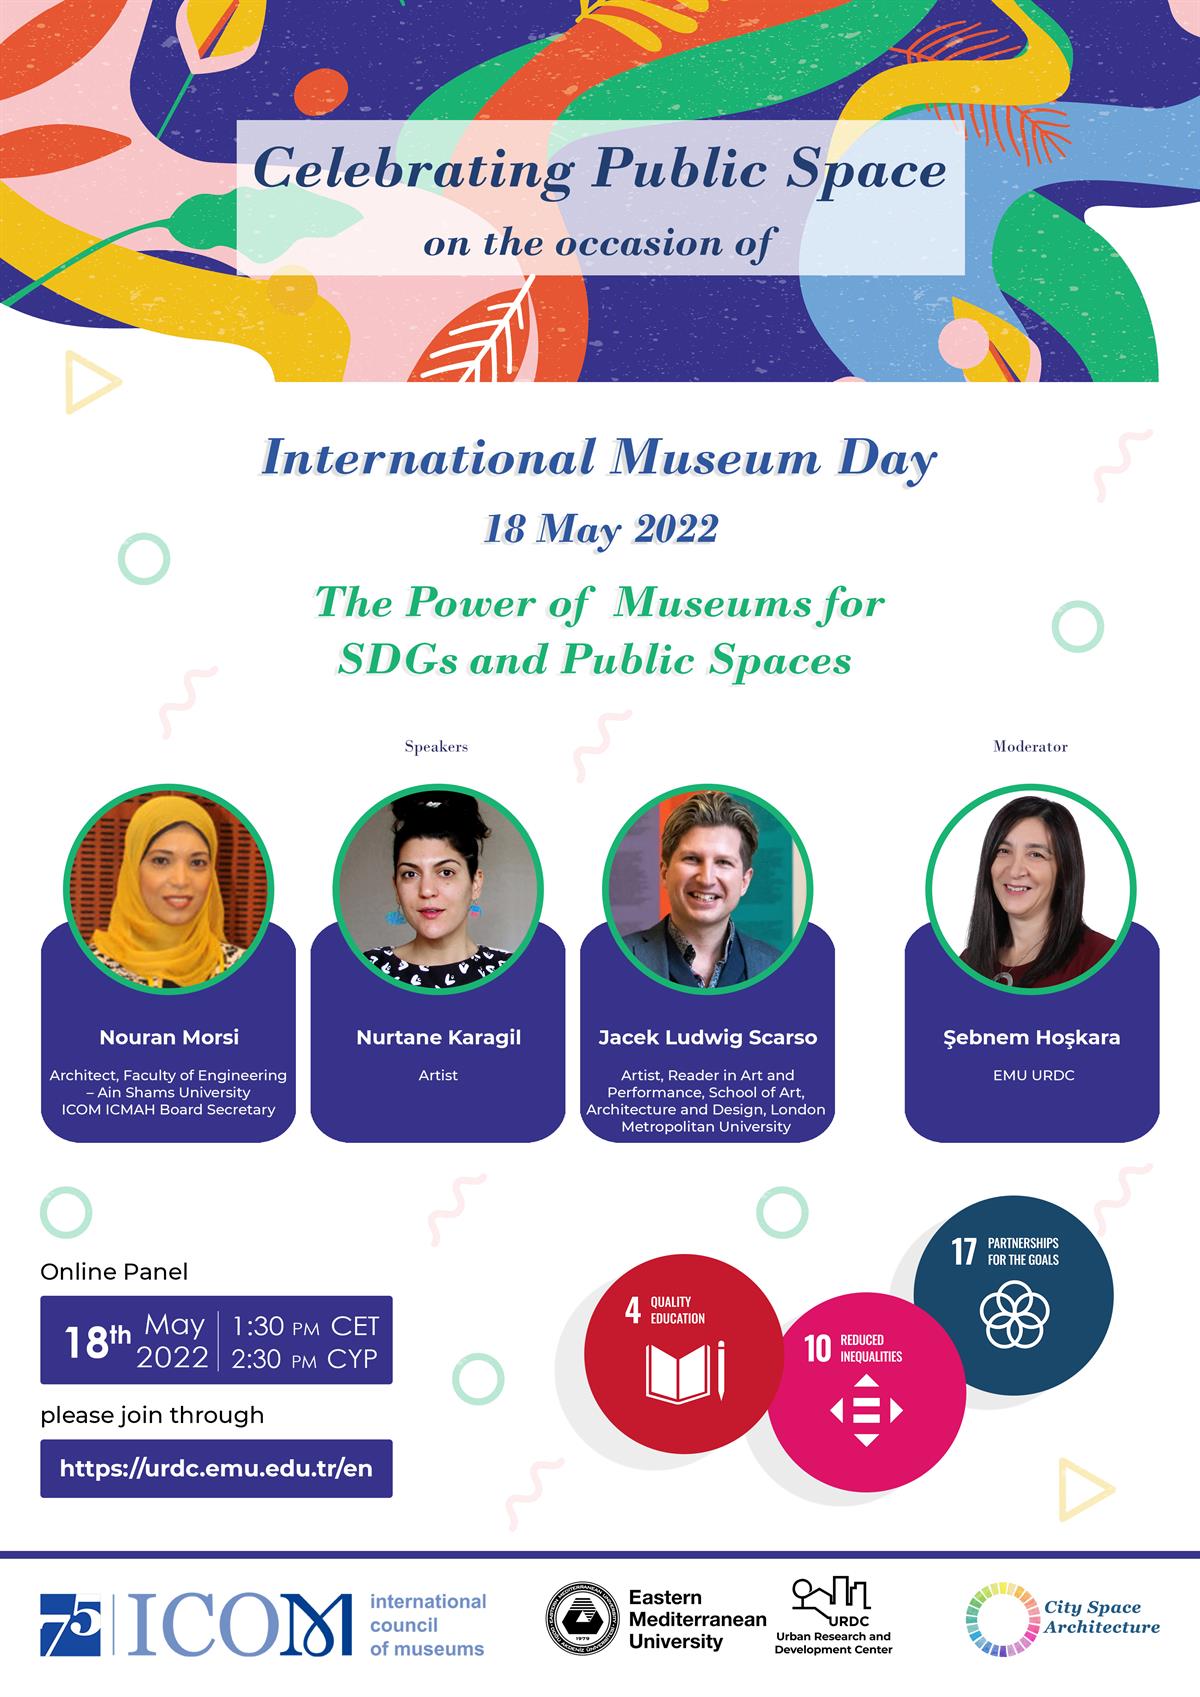 Celebrating Public Space on the Occasion of International Museum Day